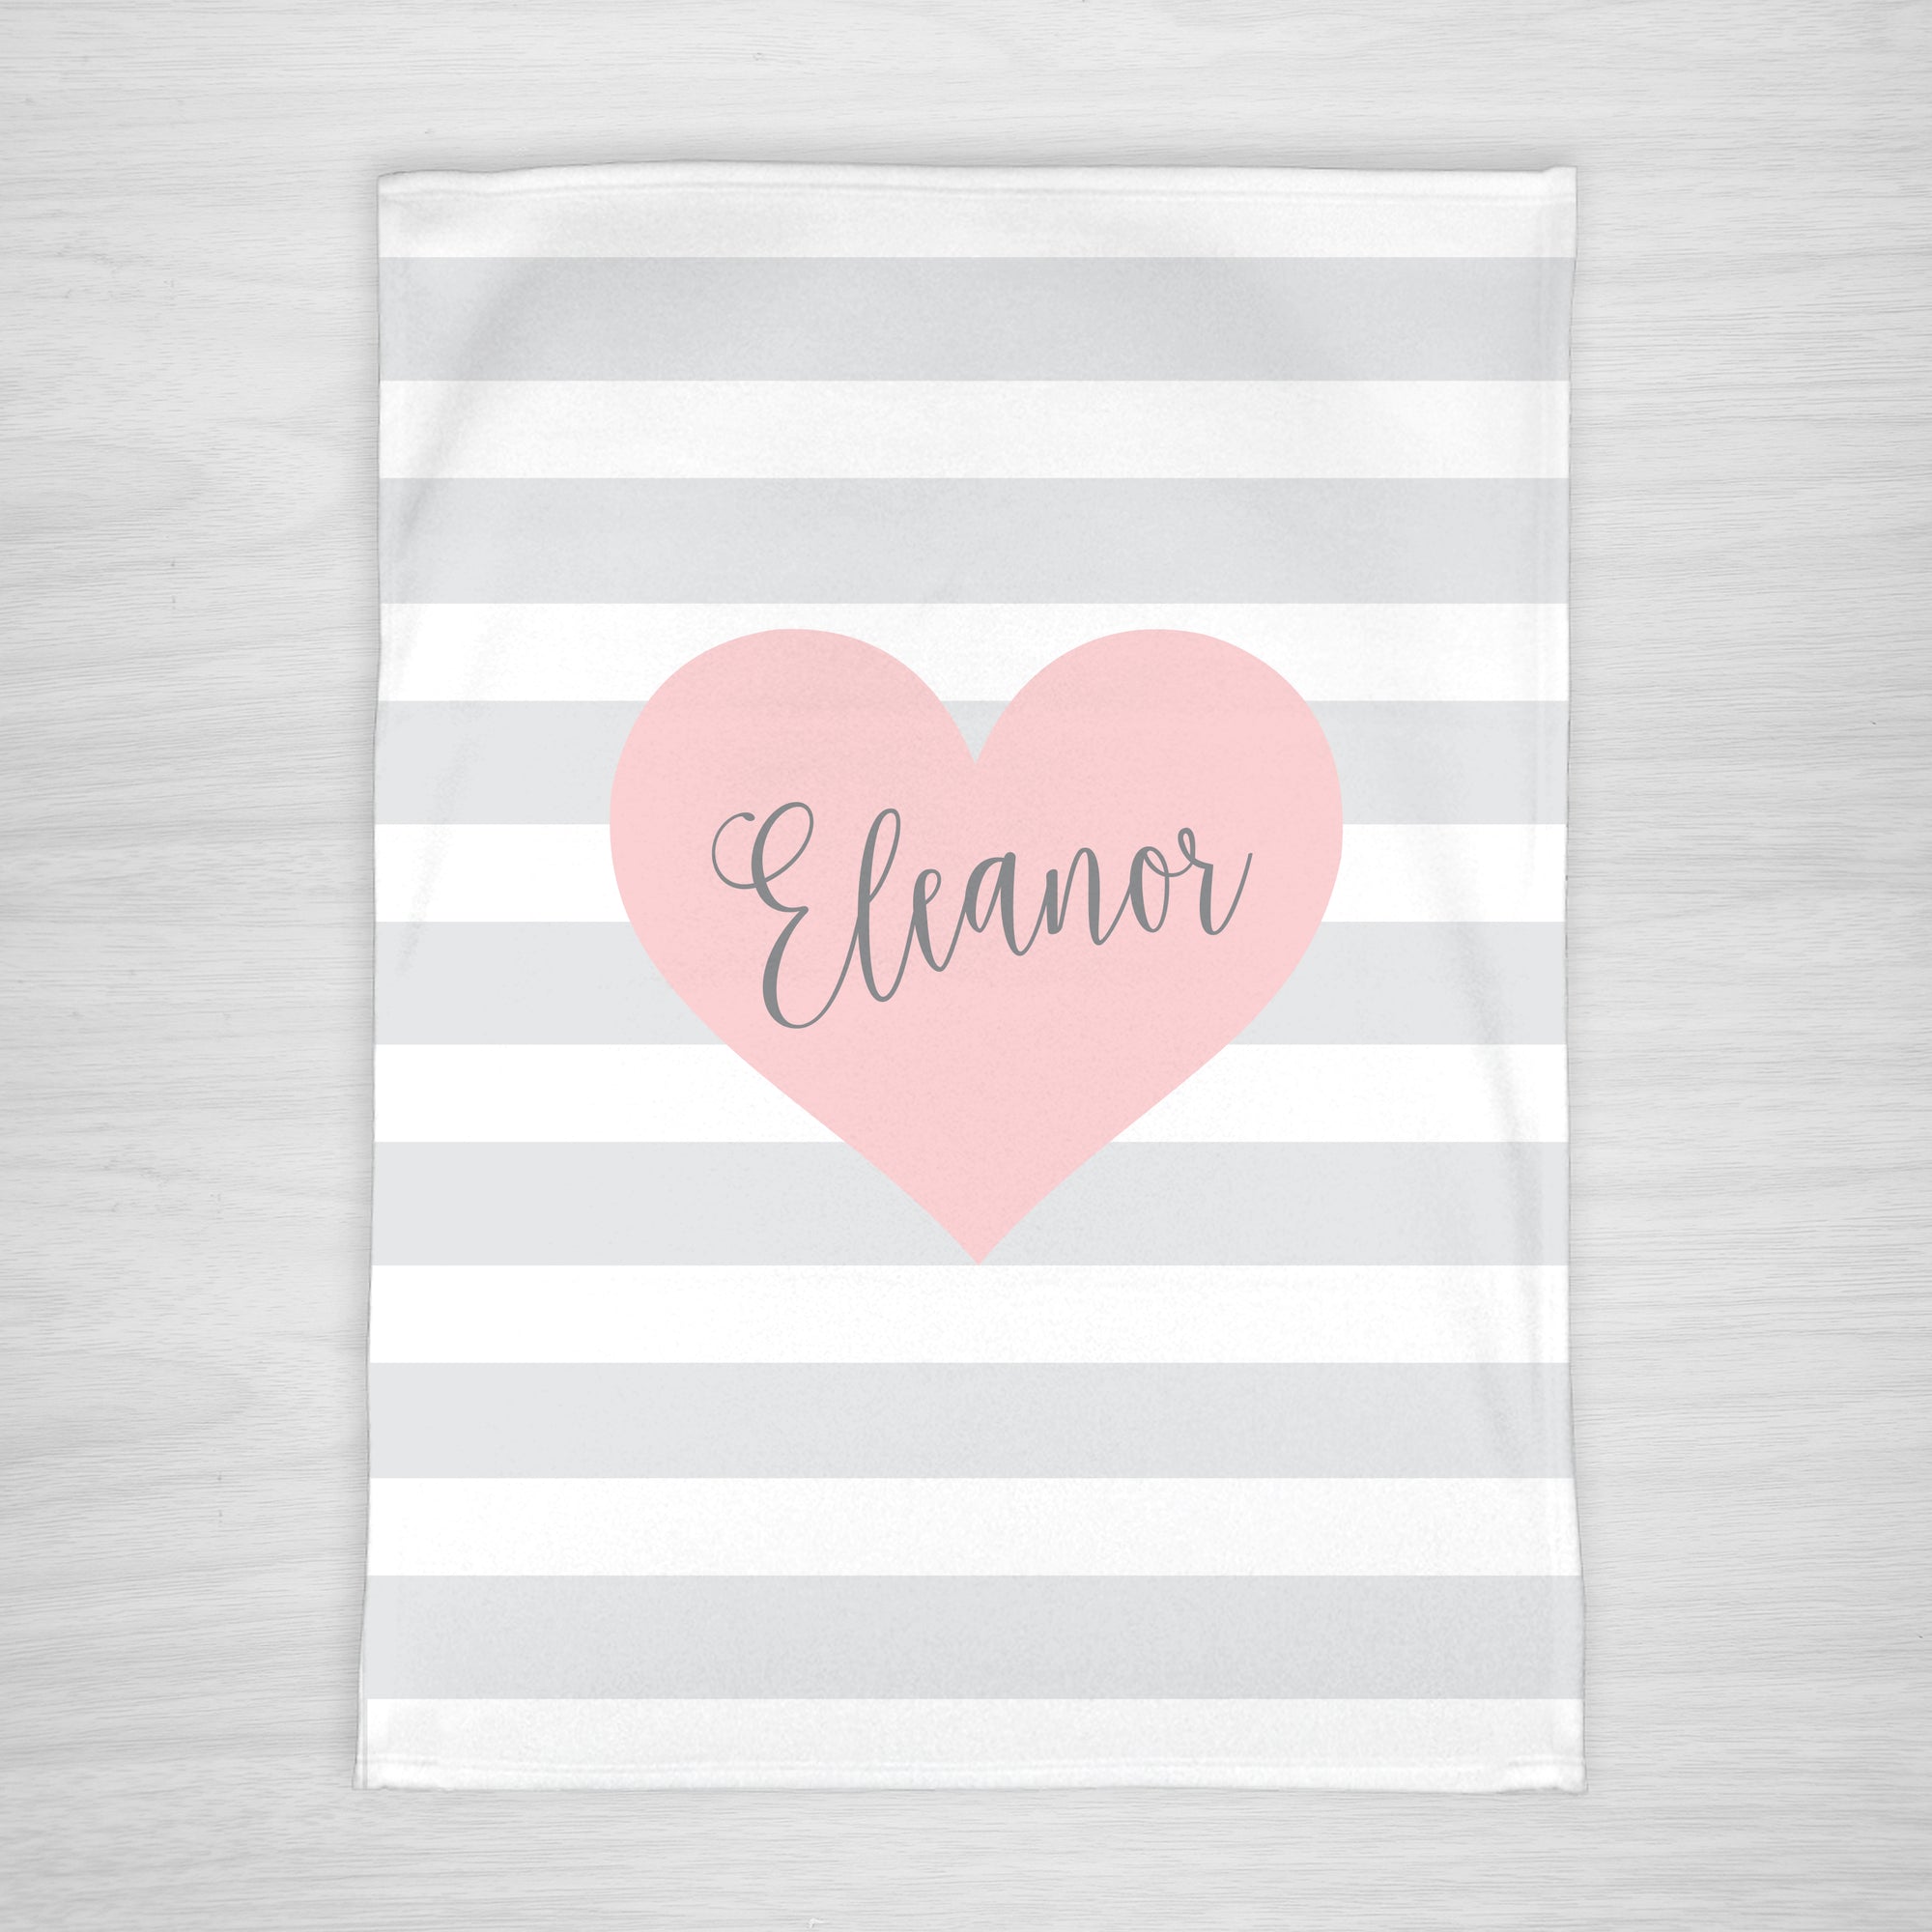 Personalized Name Blanket with simple heart | Pipsy.com